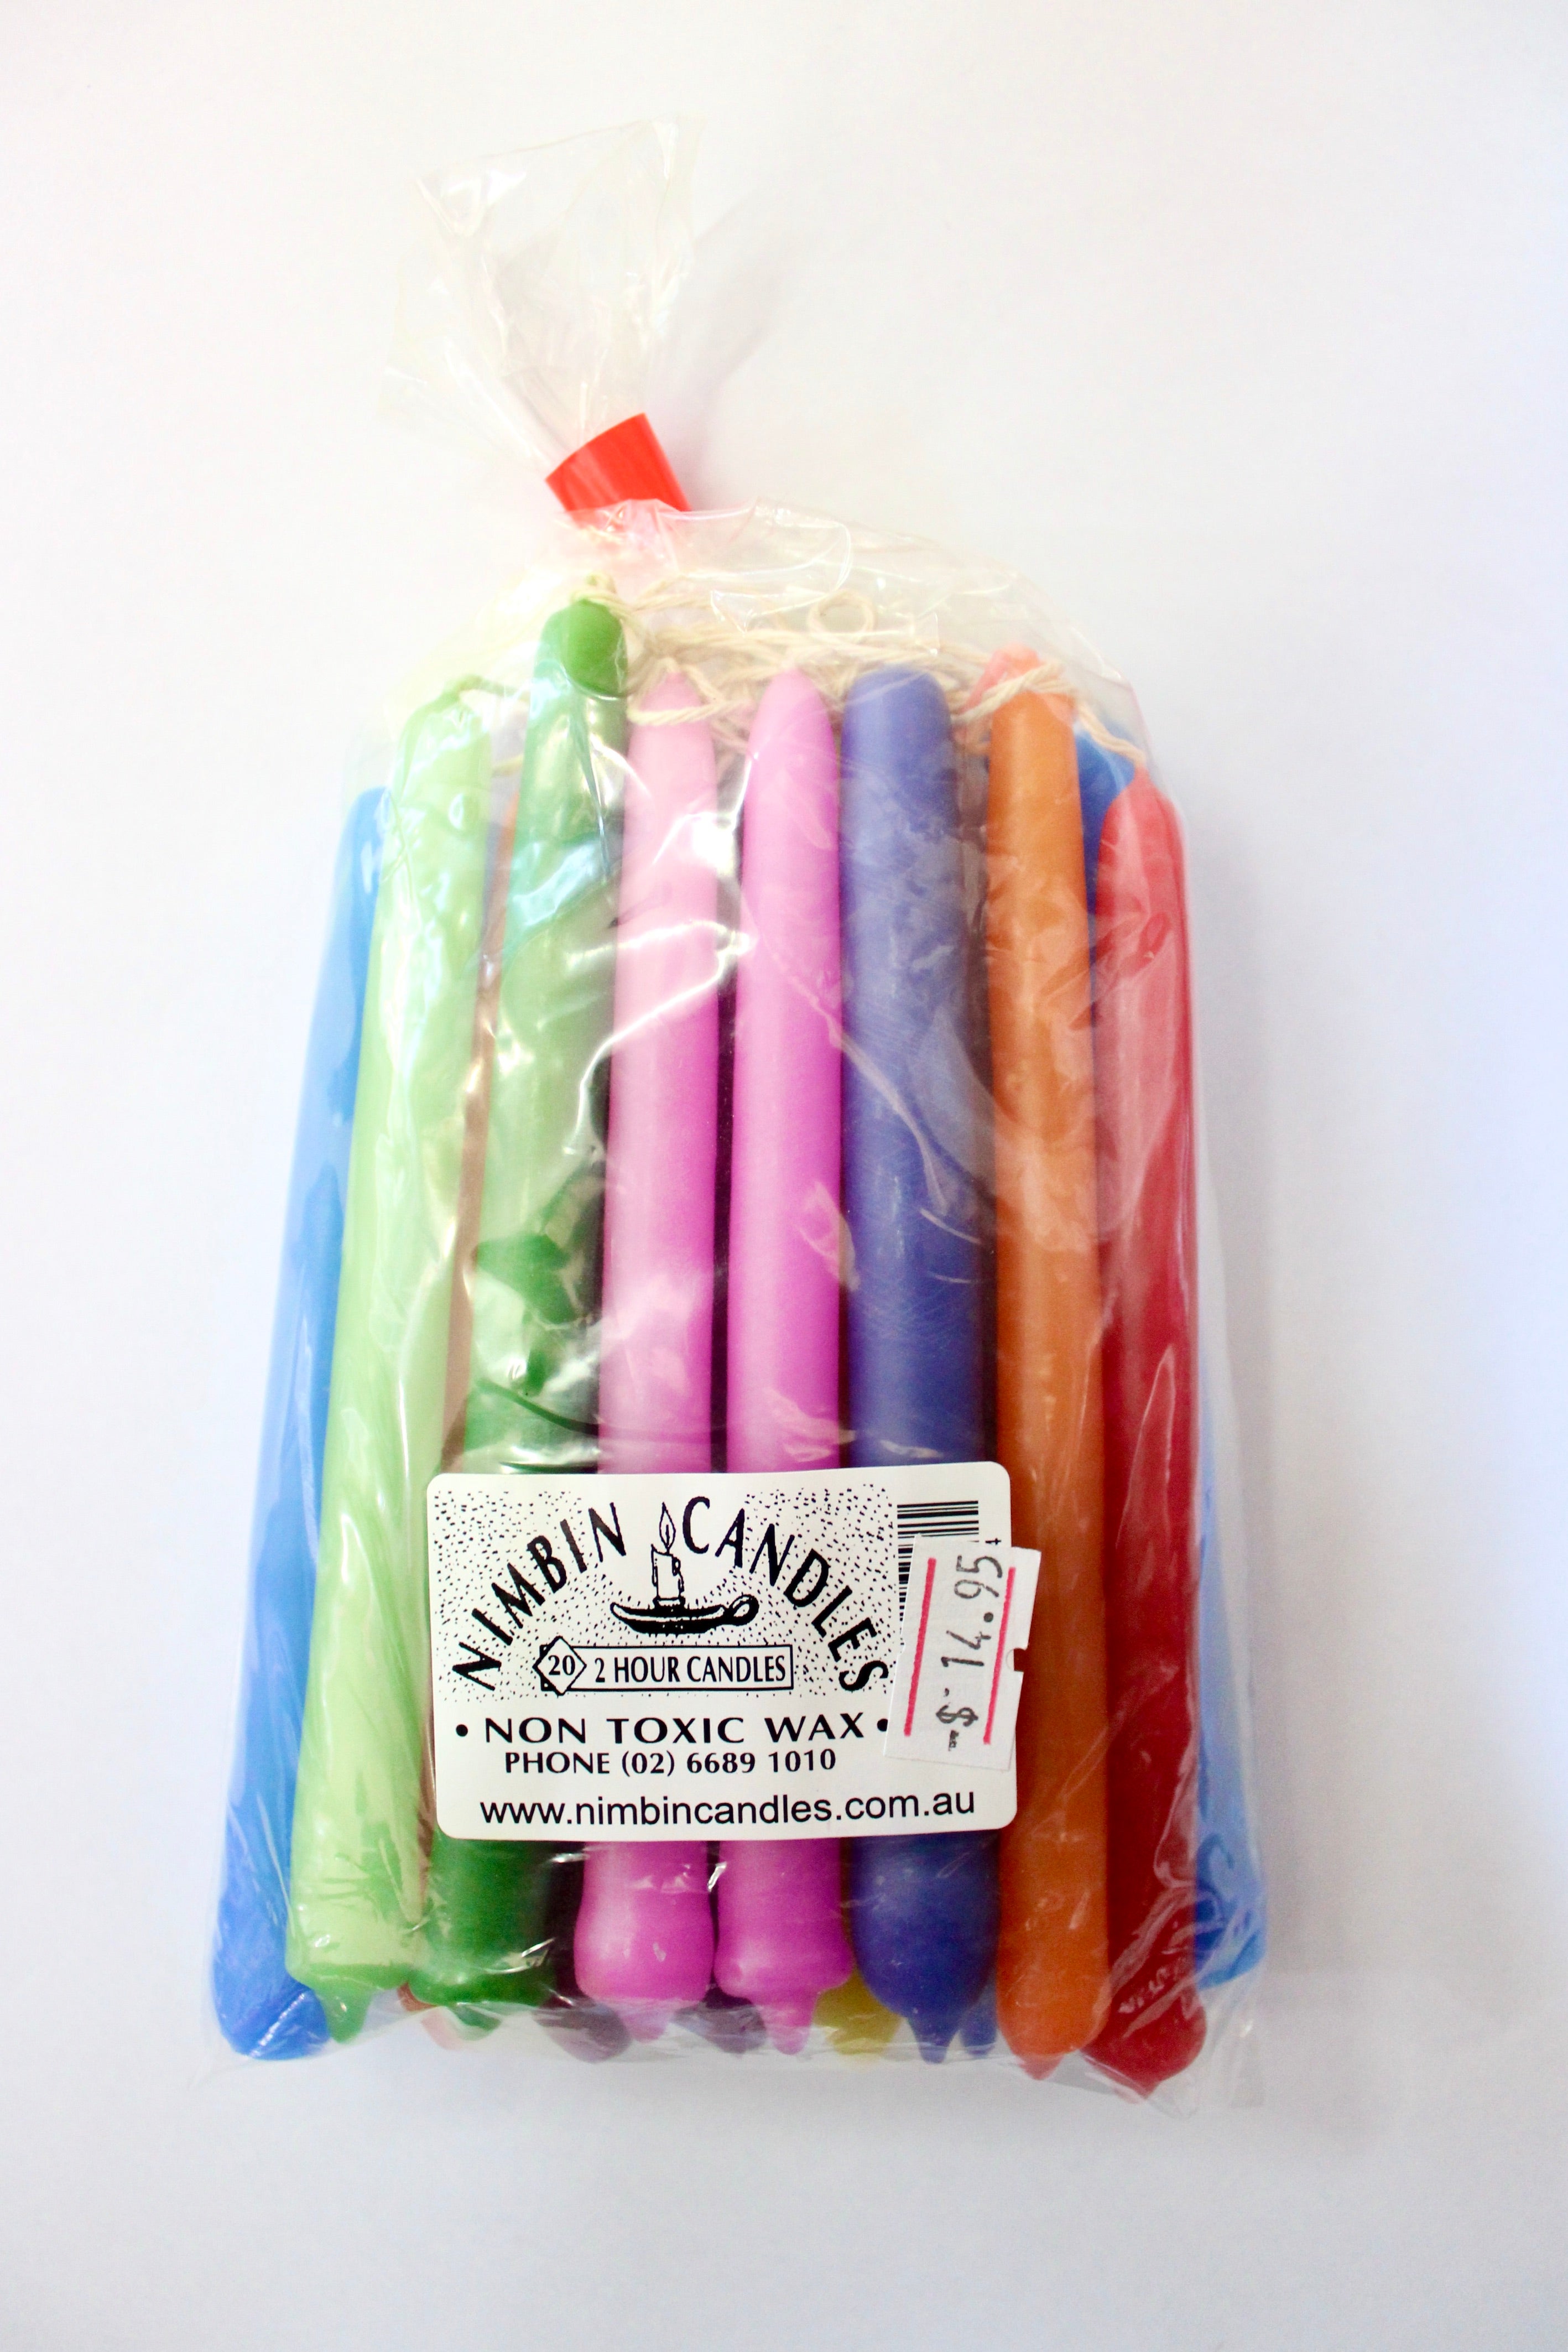 Nimbin Candles Unscented Taper Candles